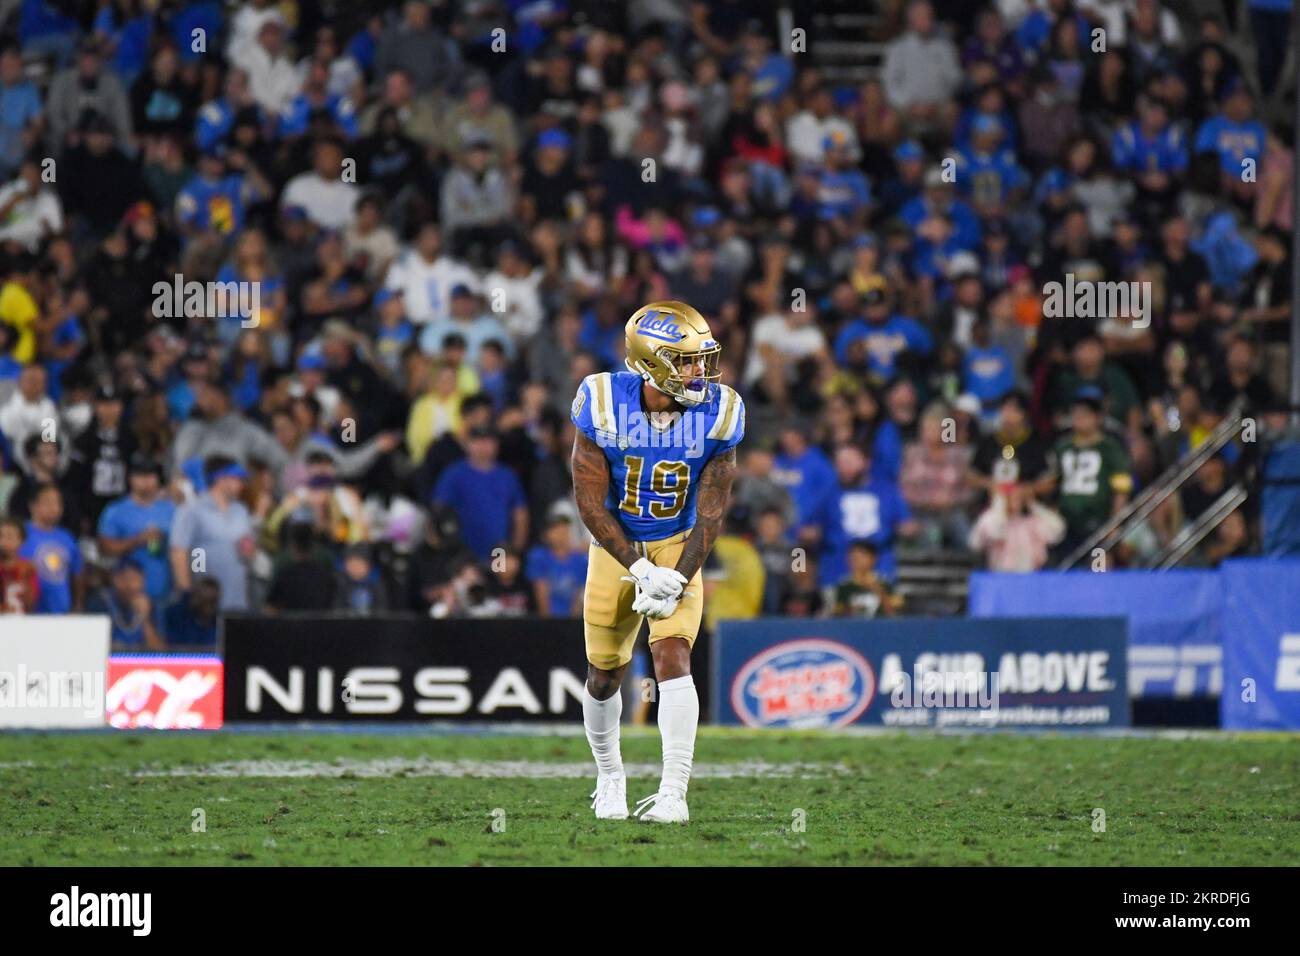 UCLA Bruins wide receiver Kazmeir Allen (19) during an NCAA football game against the Washington Huskies, Friday, Sep. 30, 2022, in Pasadena, Calif. T Stock Photo